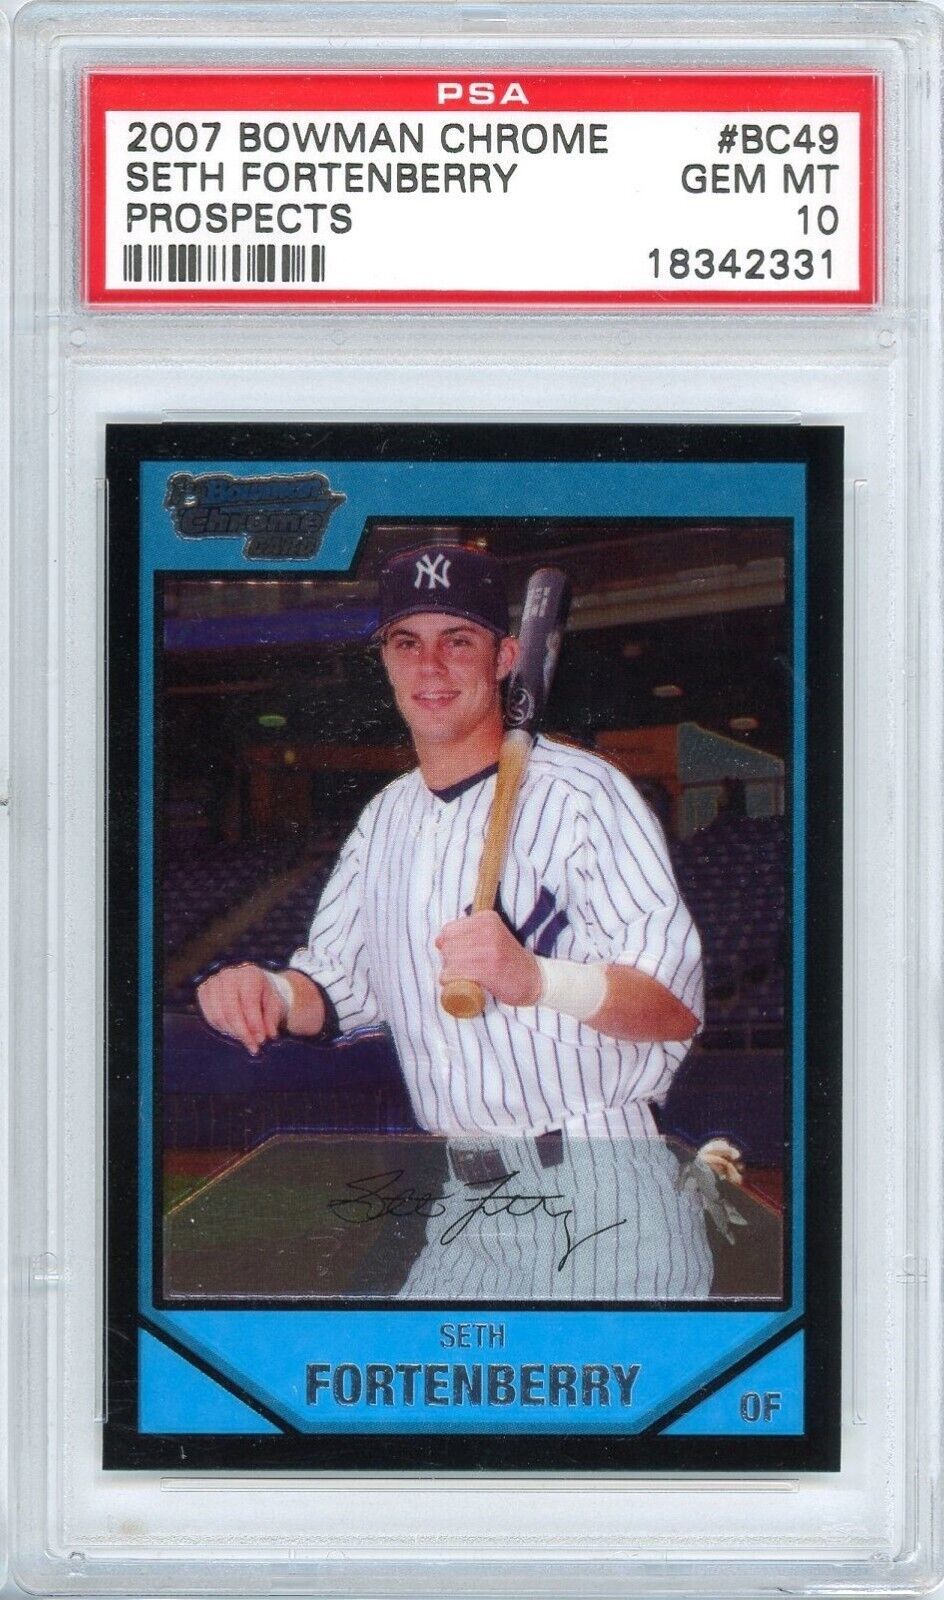 Primary image for 2007 Bowman Chrome Seth Fortenberry #BC49 PSA 10 P1257